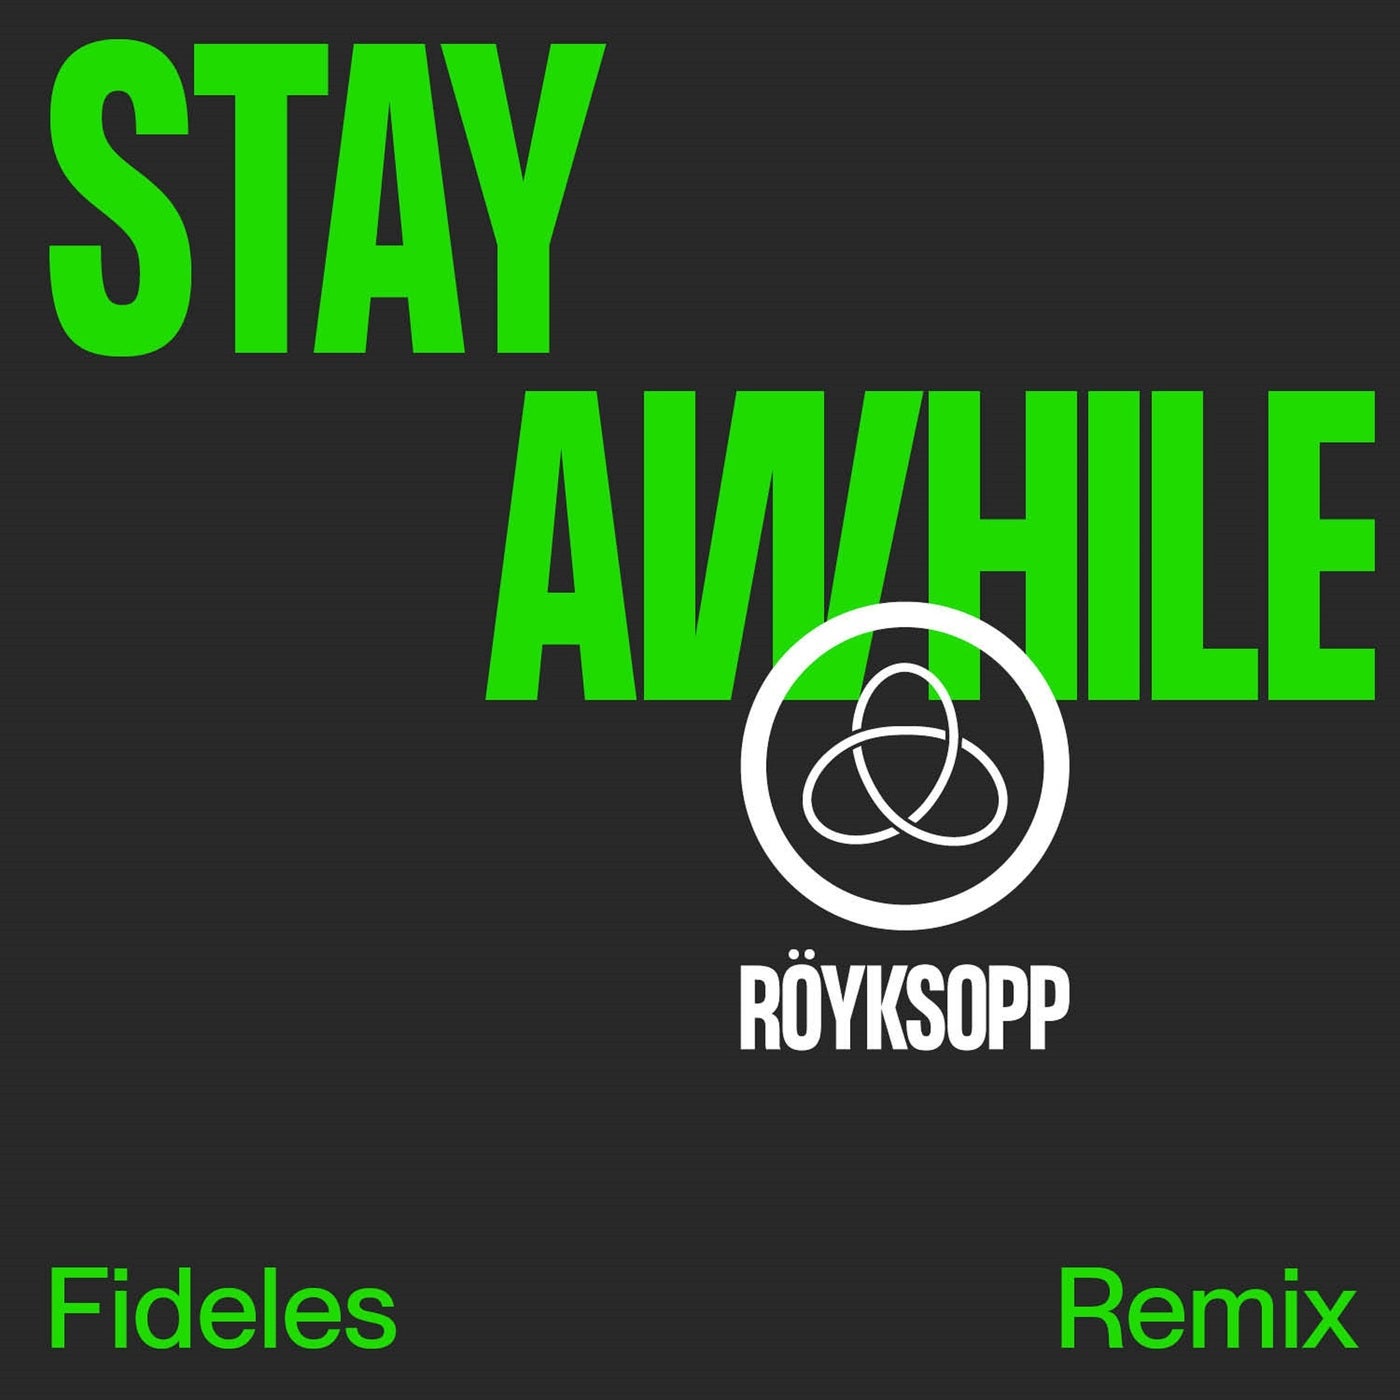 Royksopp - Stay Awhile feat. Susanne Sundfor (Fideles Remix)